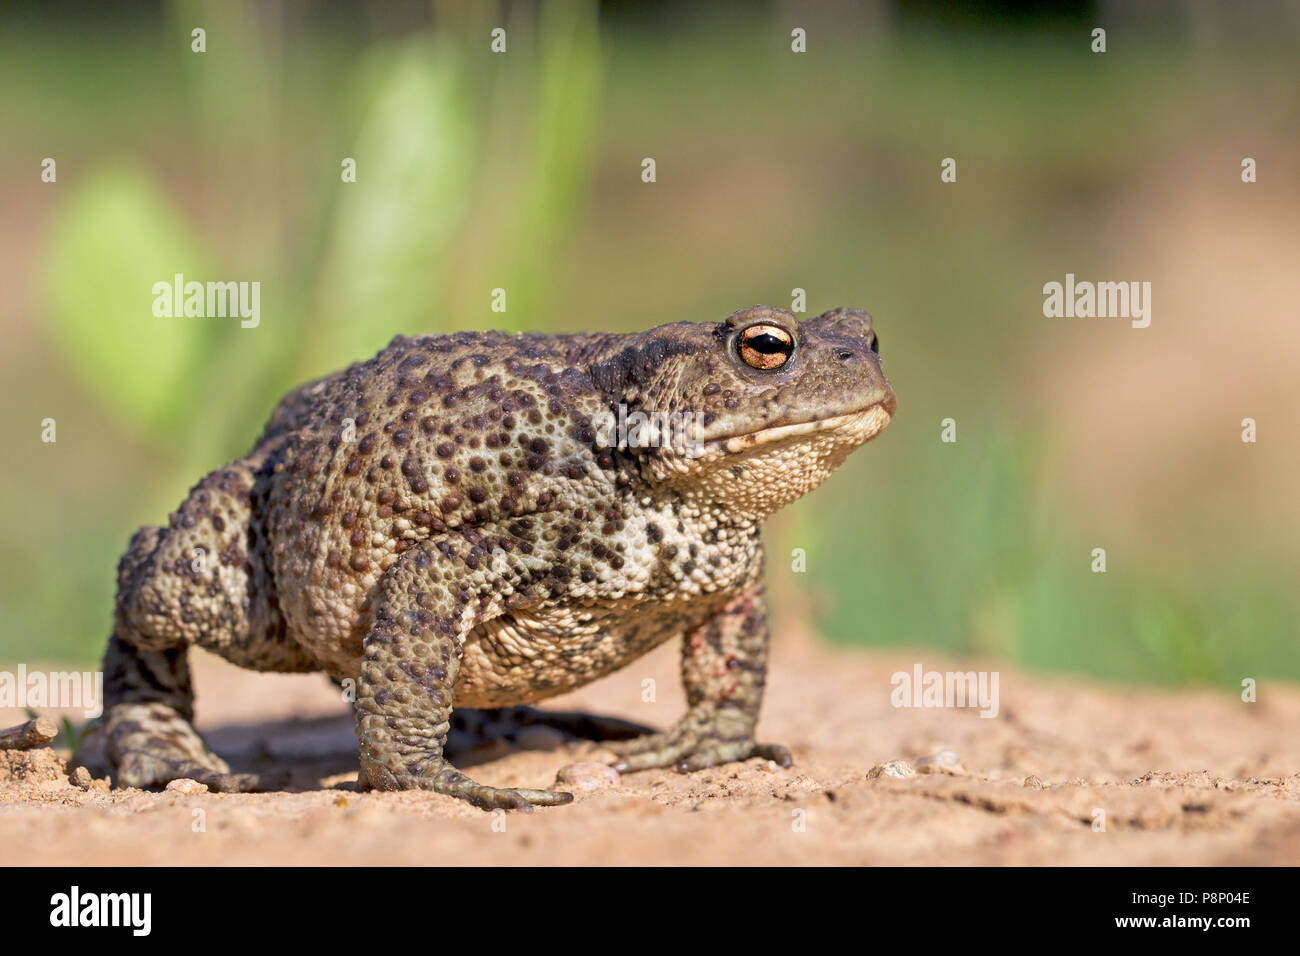 female Common toad in defensive pose Stock Photo